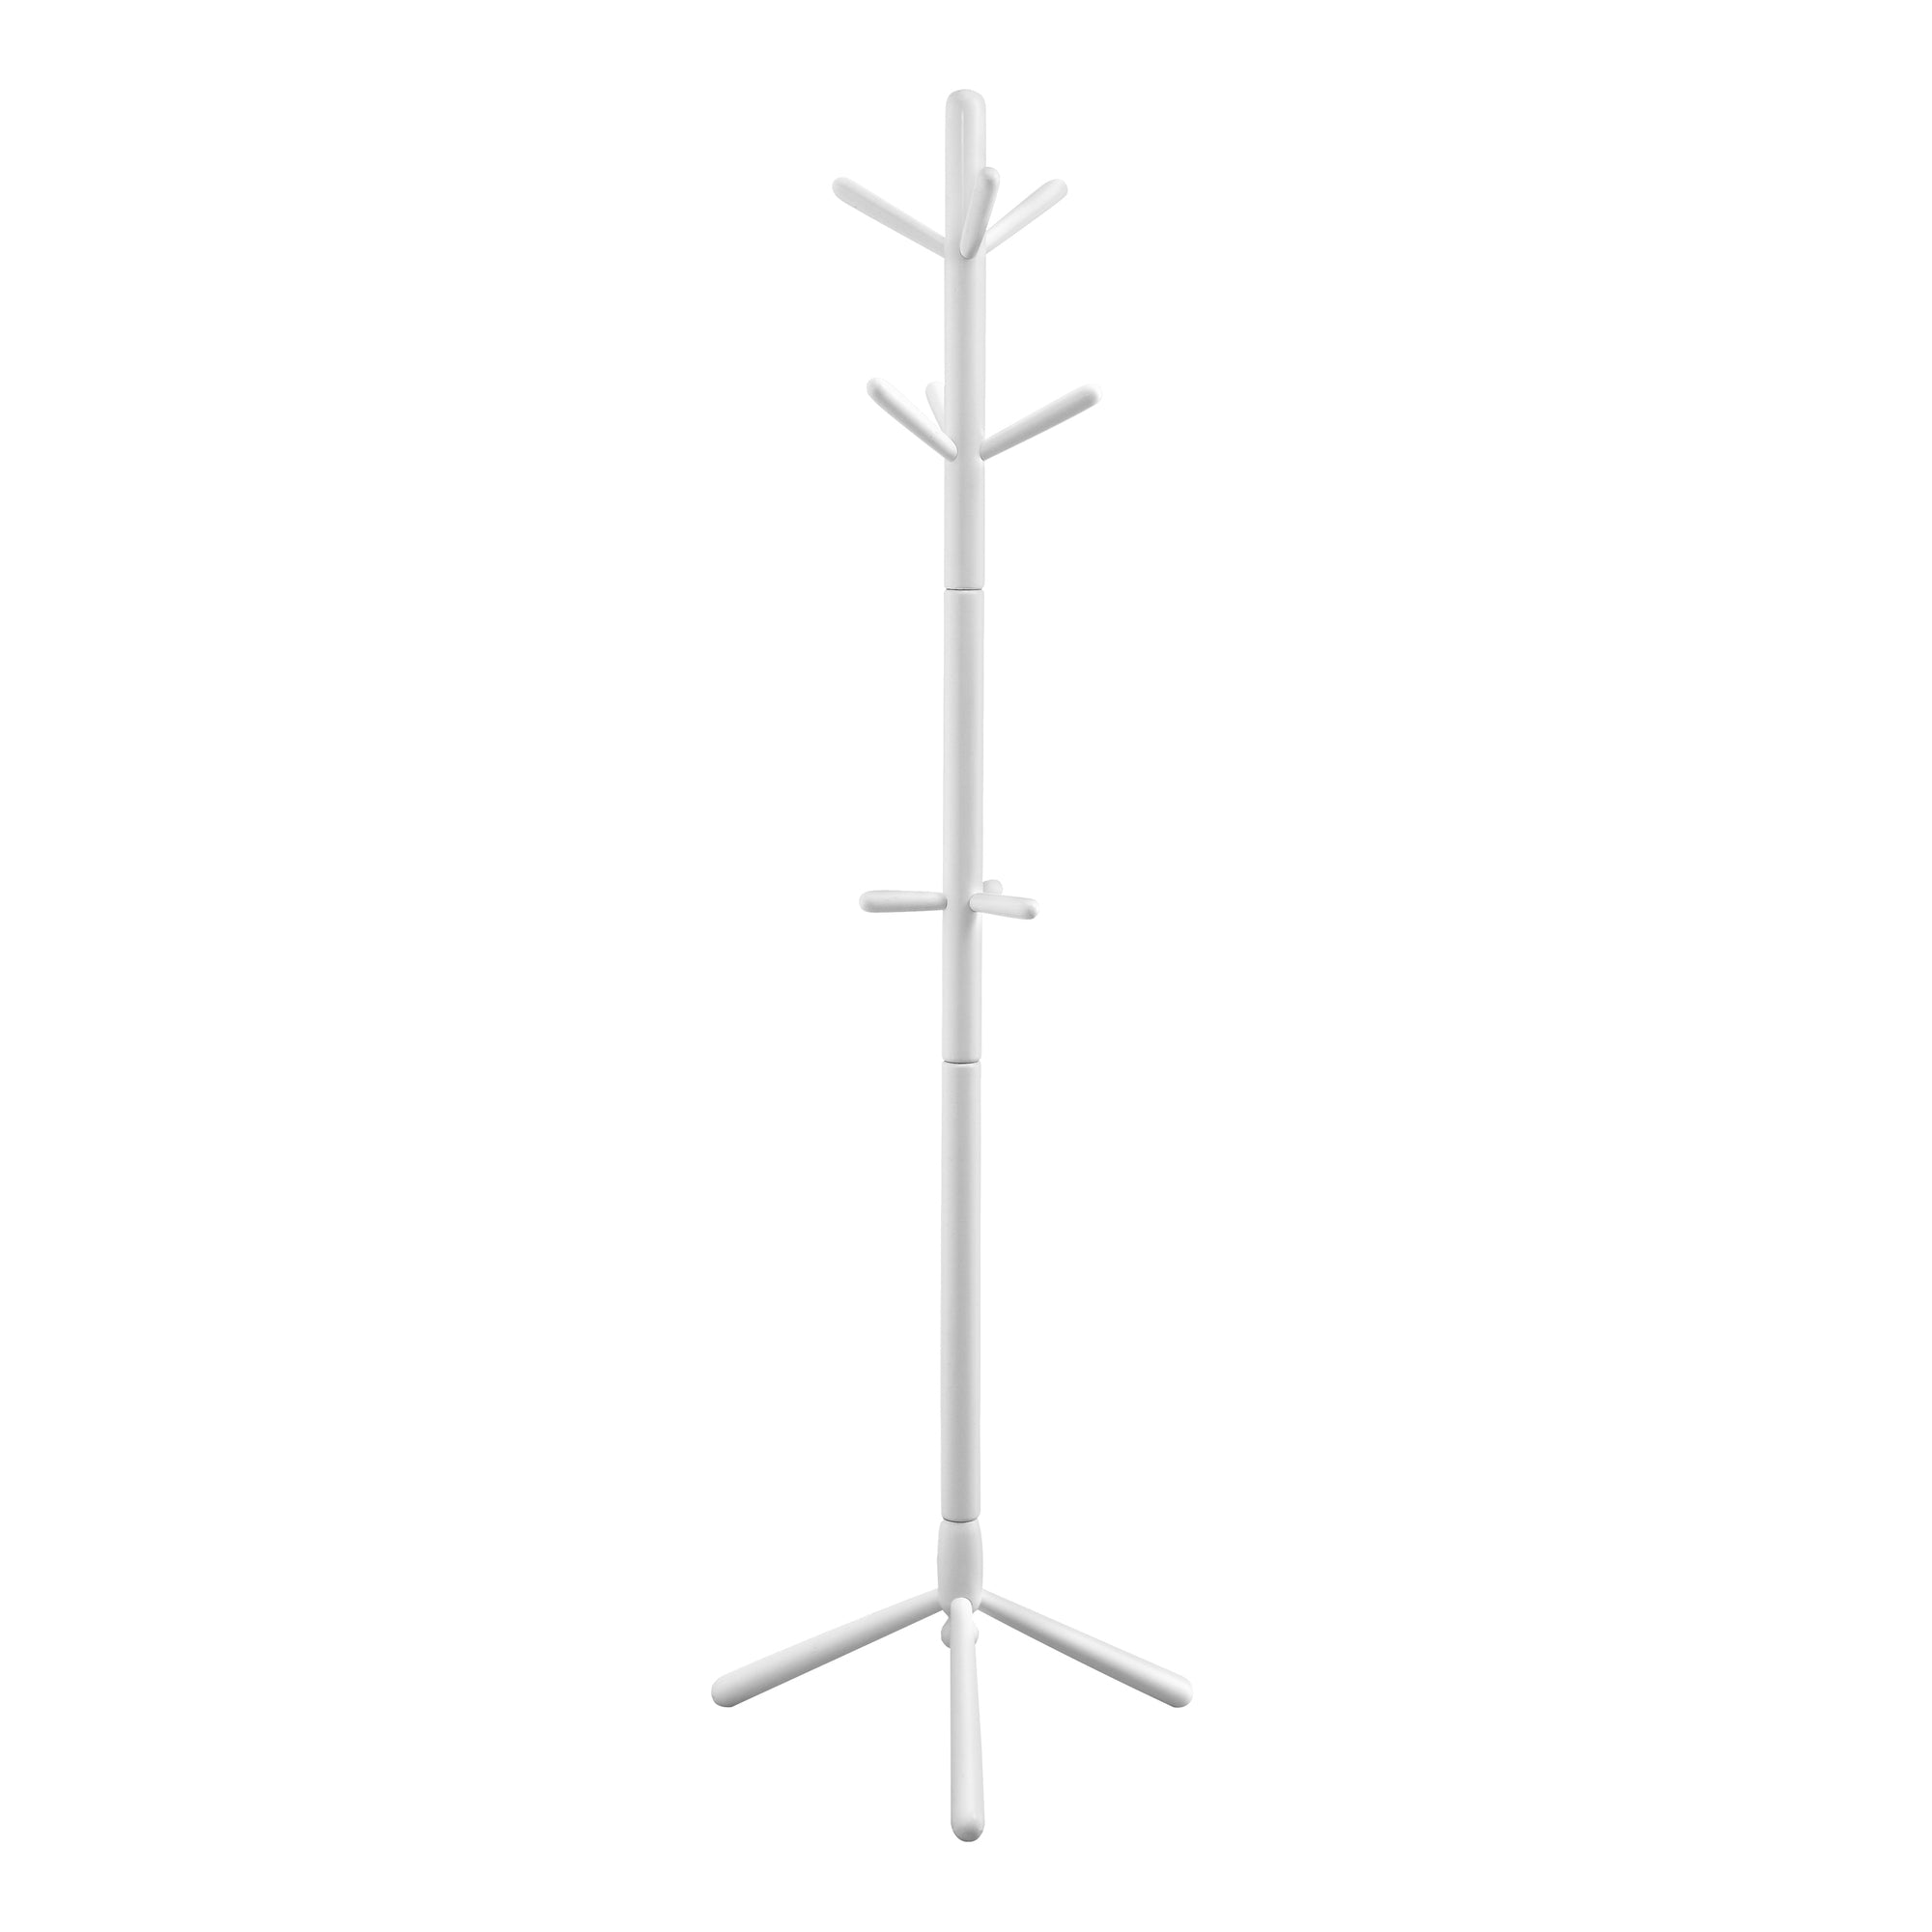 COAT RACK - 69"H / WHITE WOOD CONTEMPORARY STYLE